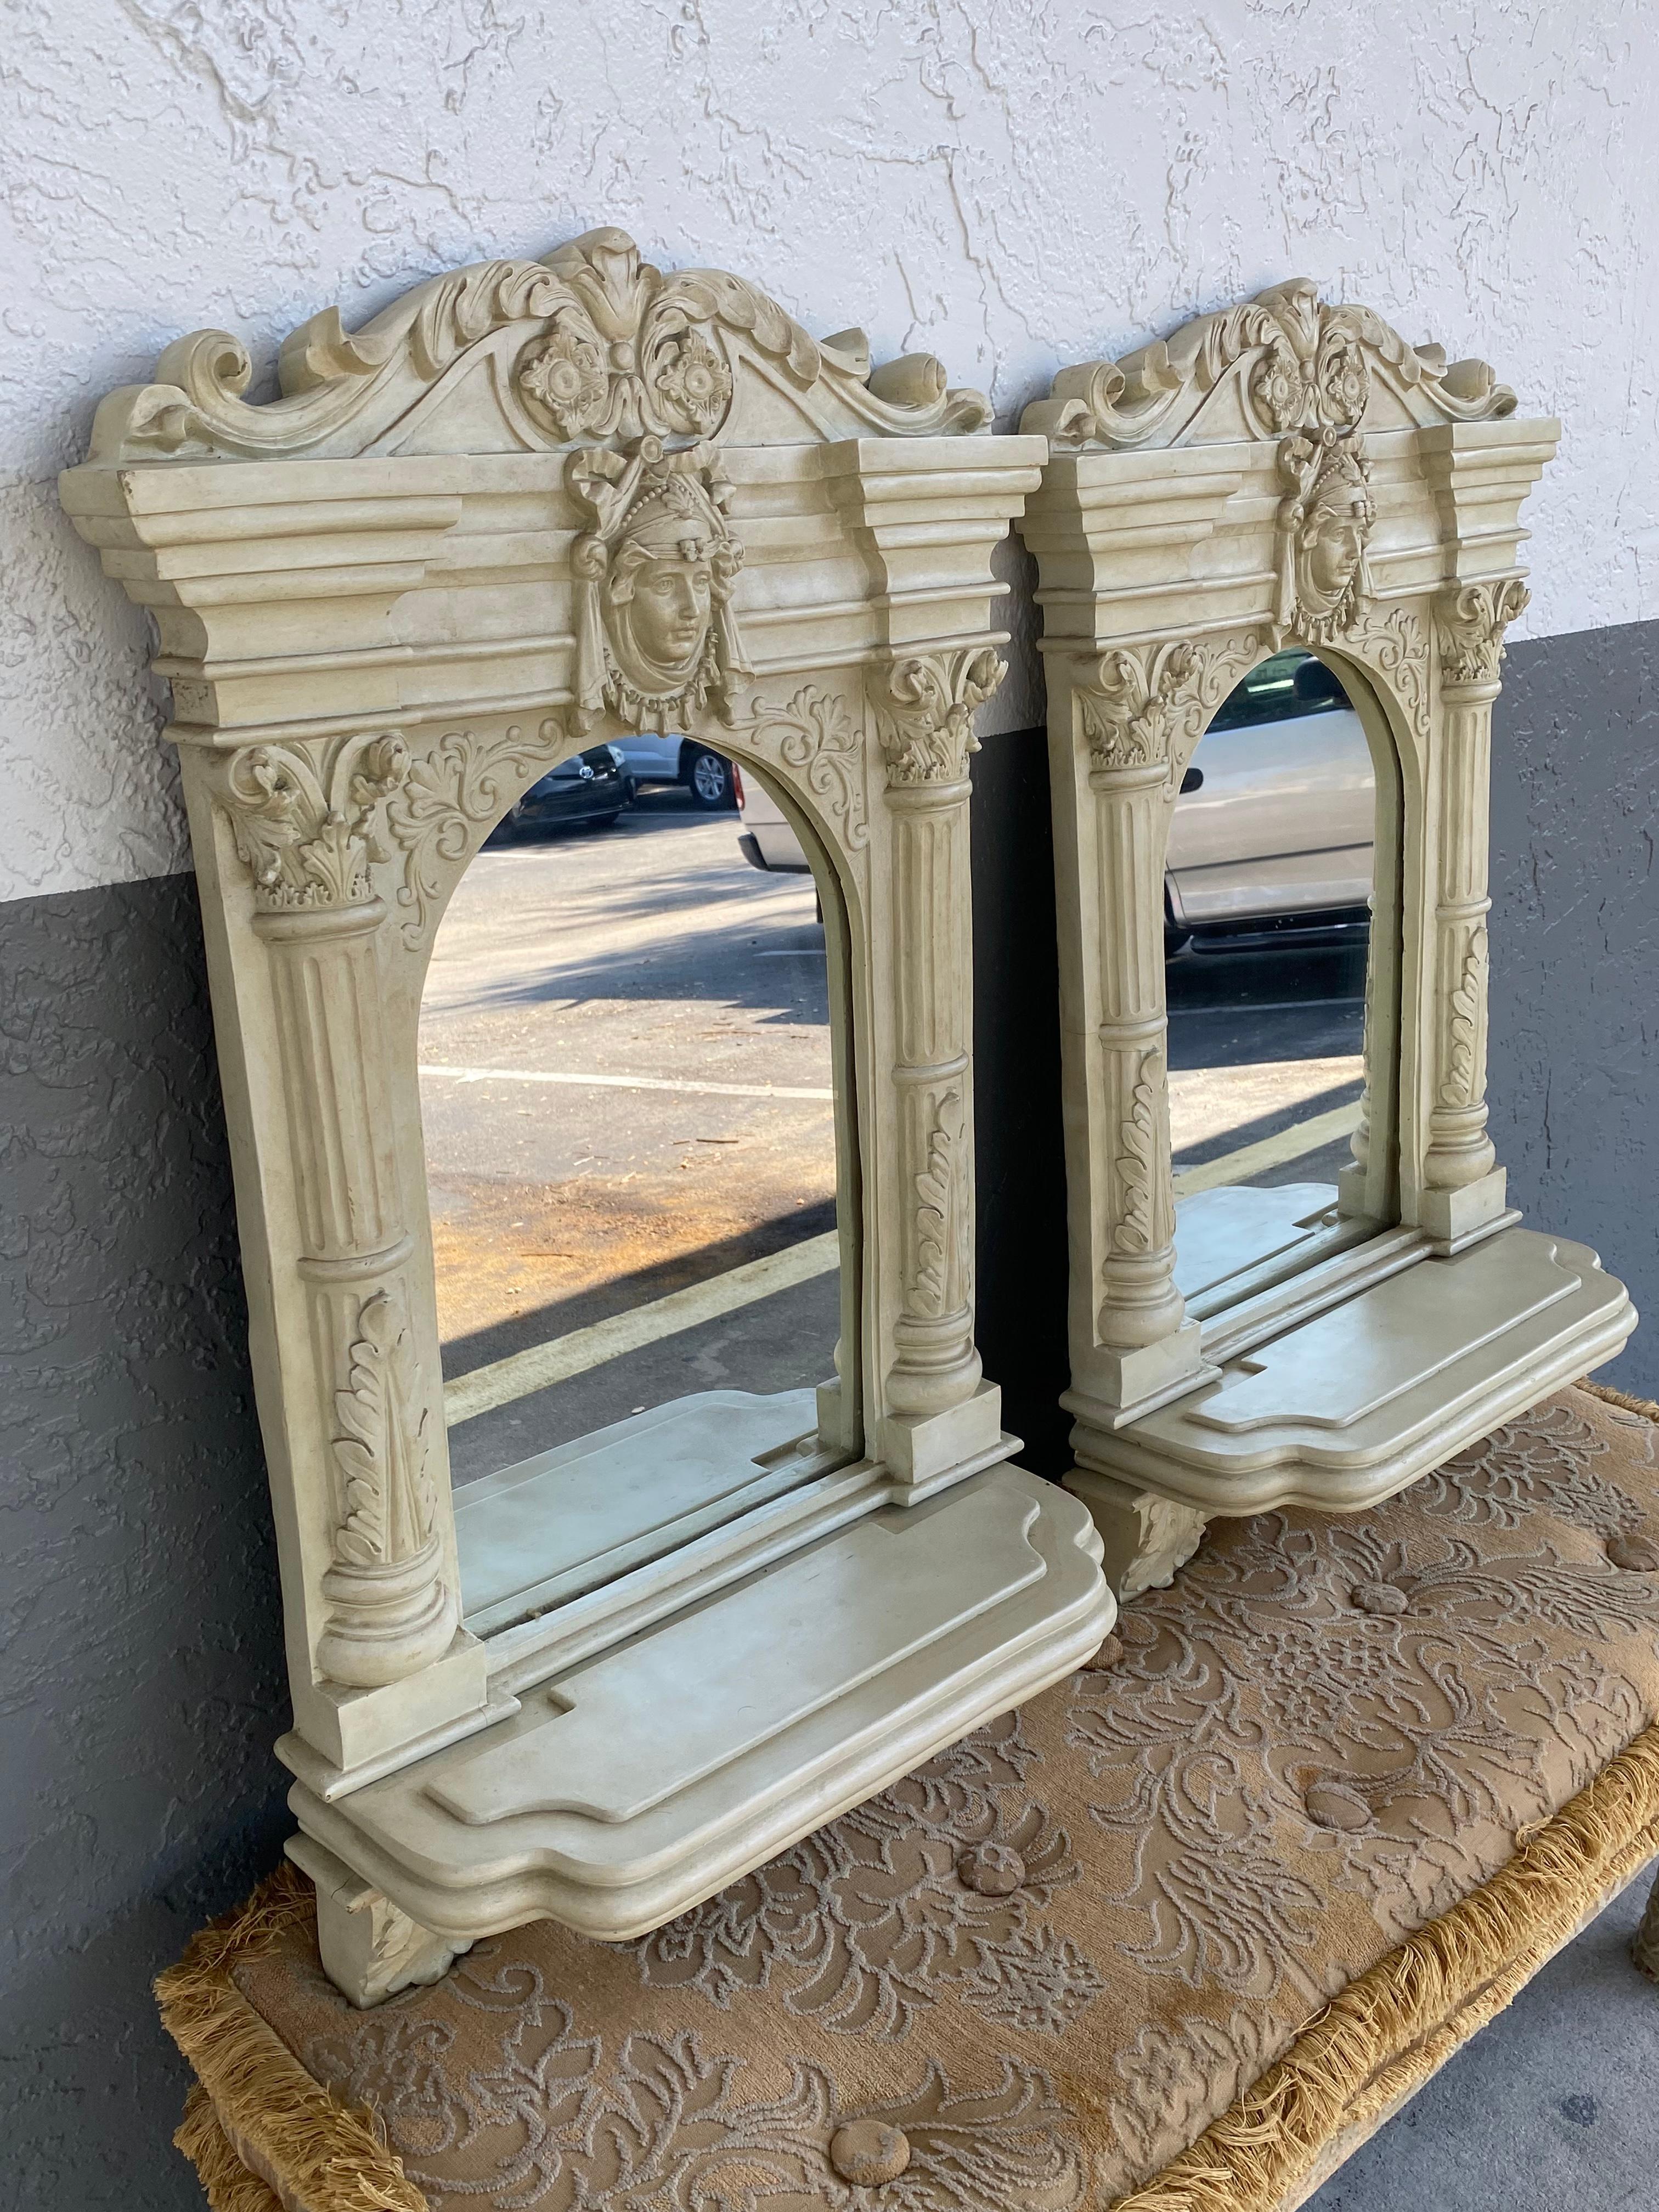 On offer on this occasion is one of the most stunning wall mirrors you could hope to find. This is an ultra-rare opportunity to acquire what is, unequivocally, the best of the best, it being a most spectacular and beautifully presented mirrors.